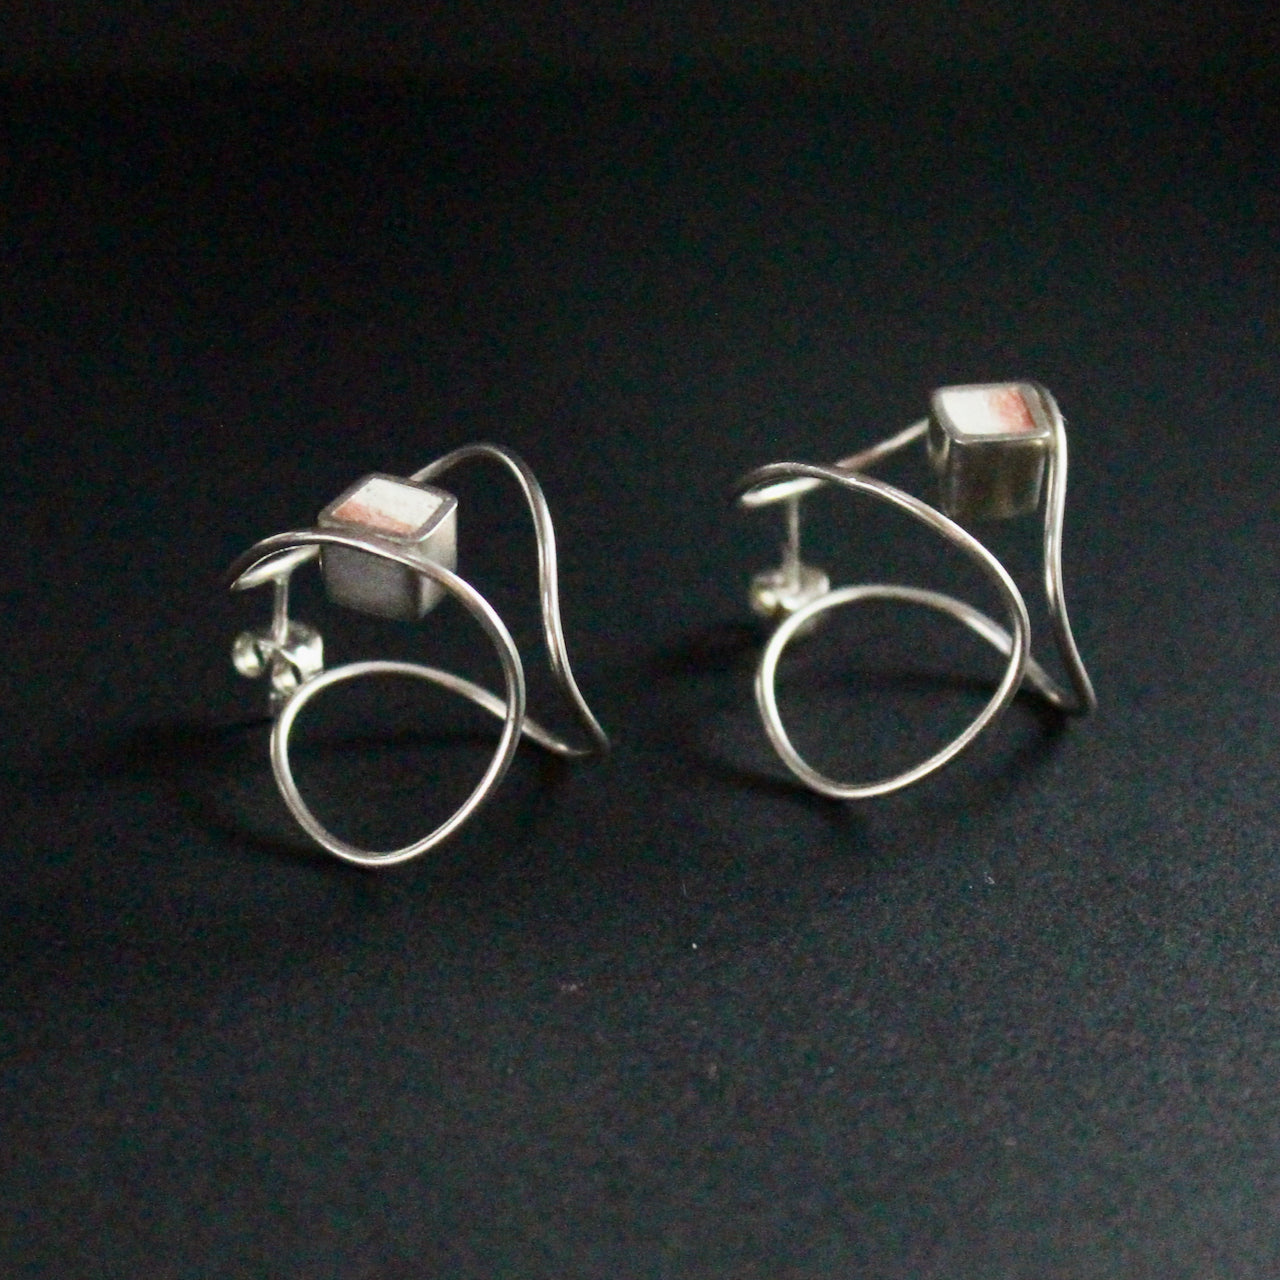 Link sterling silver earrings with cement cube by artist Amy Stringer